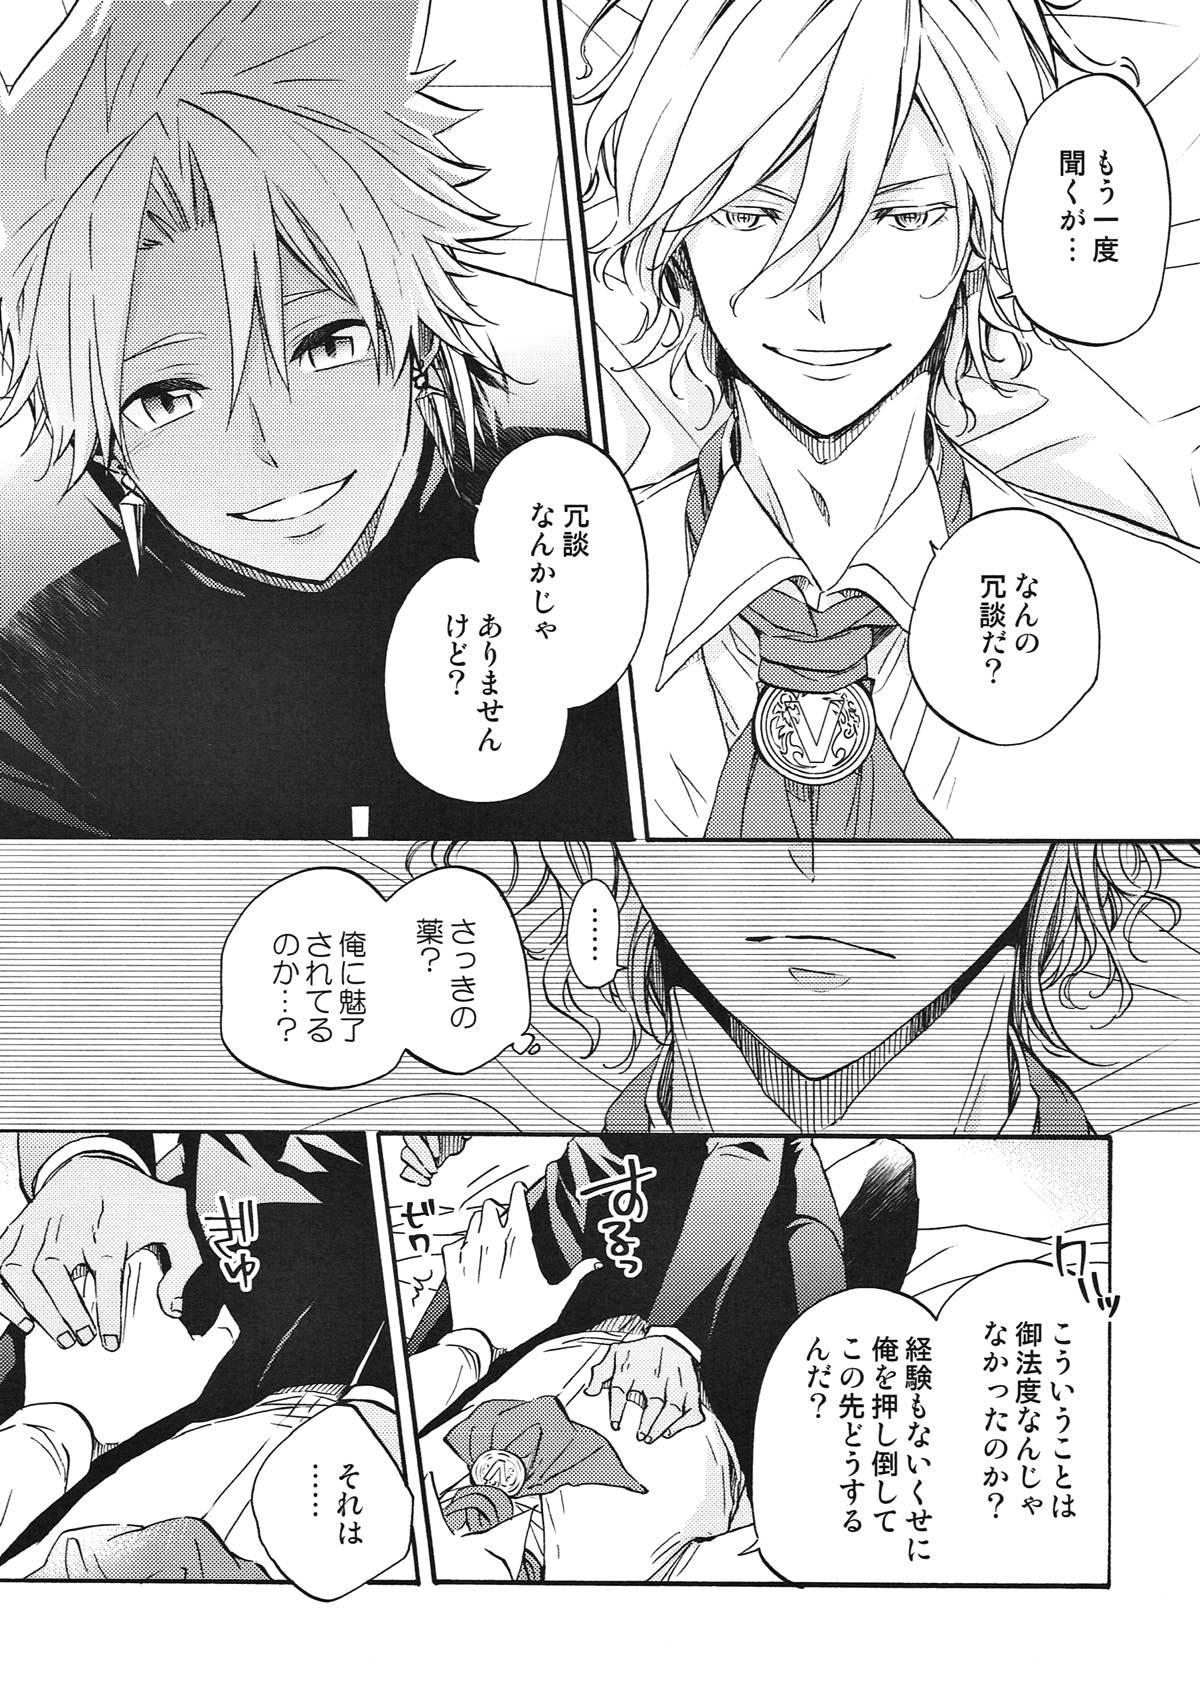 Mouth honey trap - Fate grand order Jeune Mec - Page 10